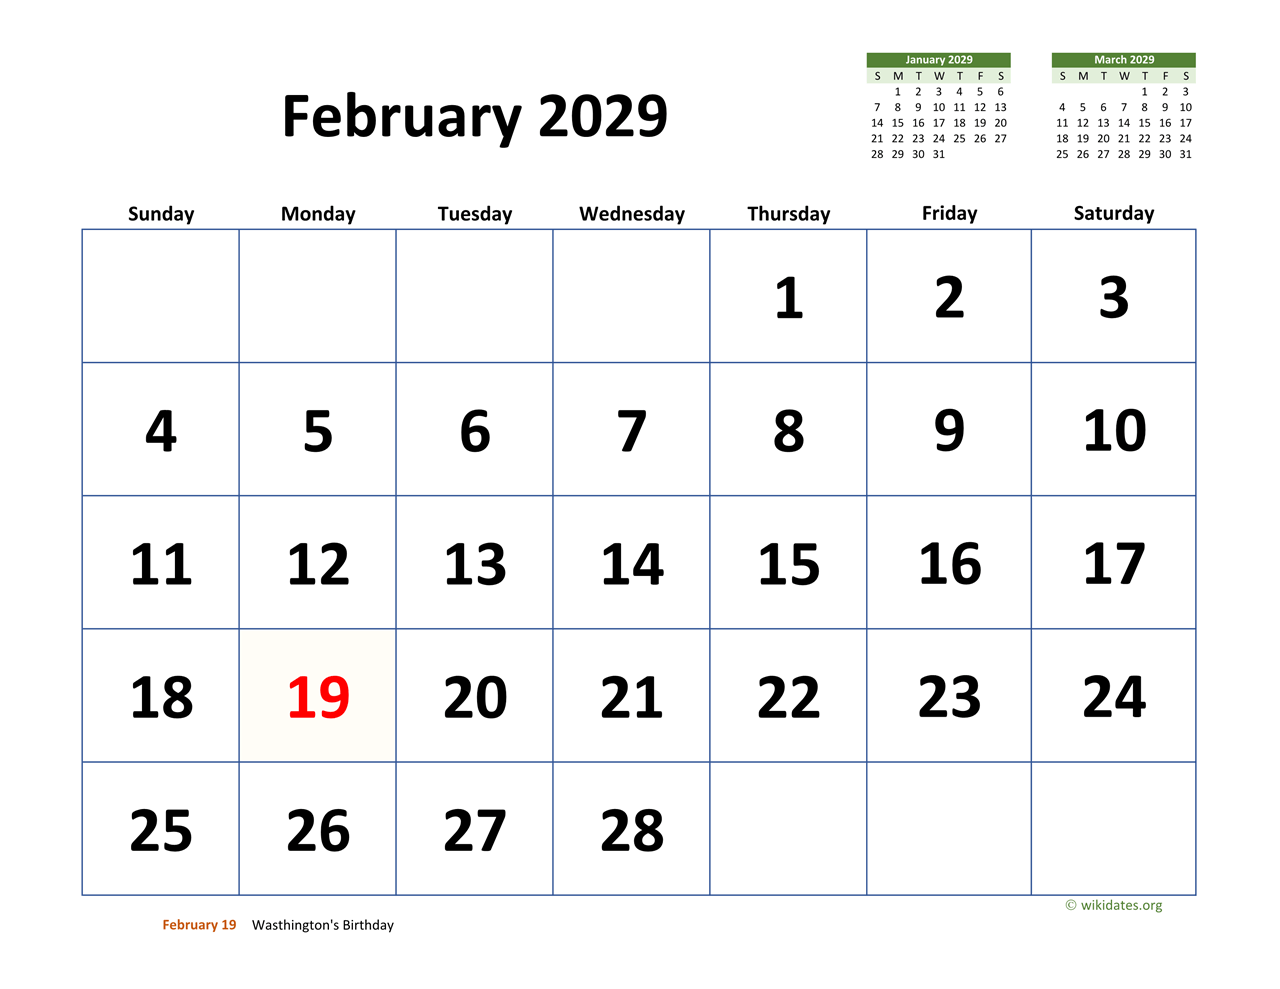 February 2029 Calendar with Extralarge Dates